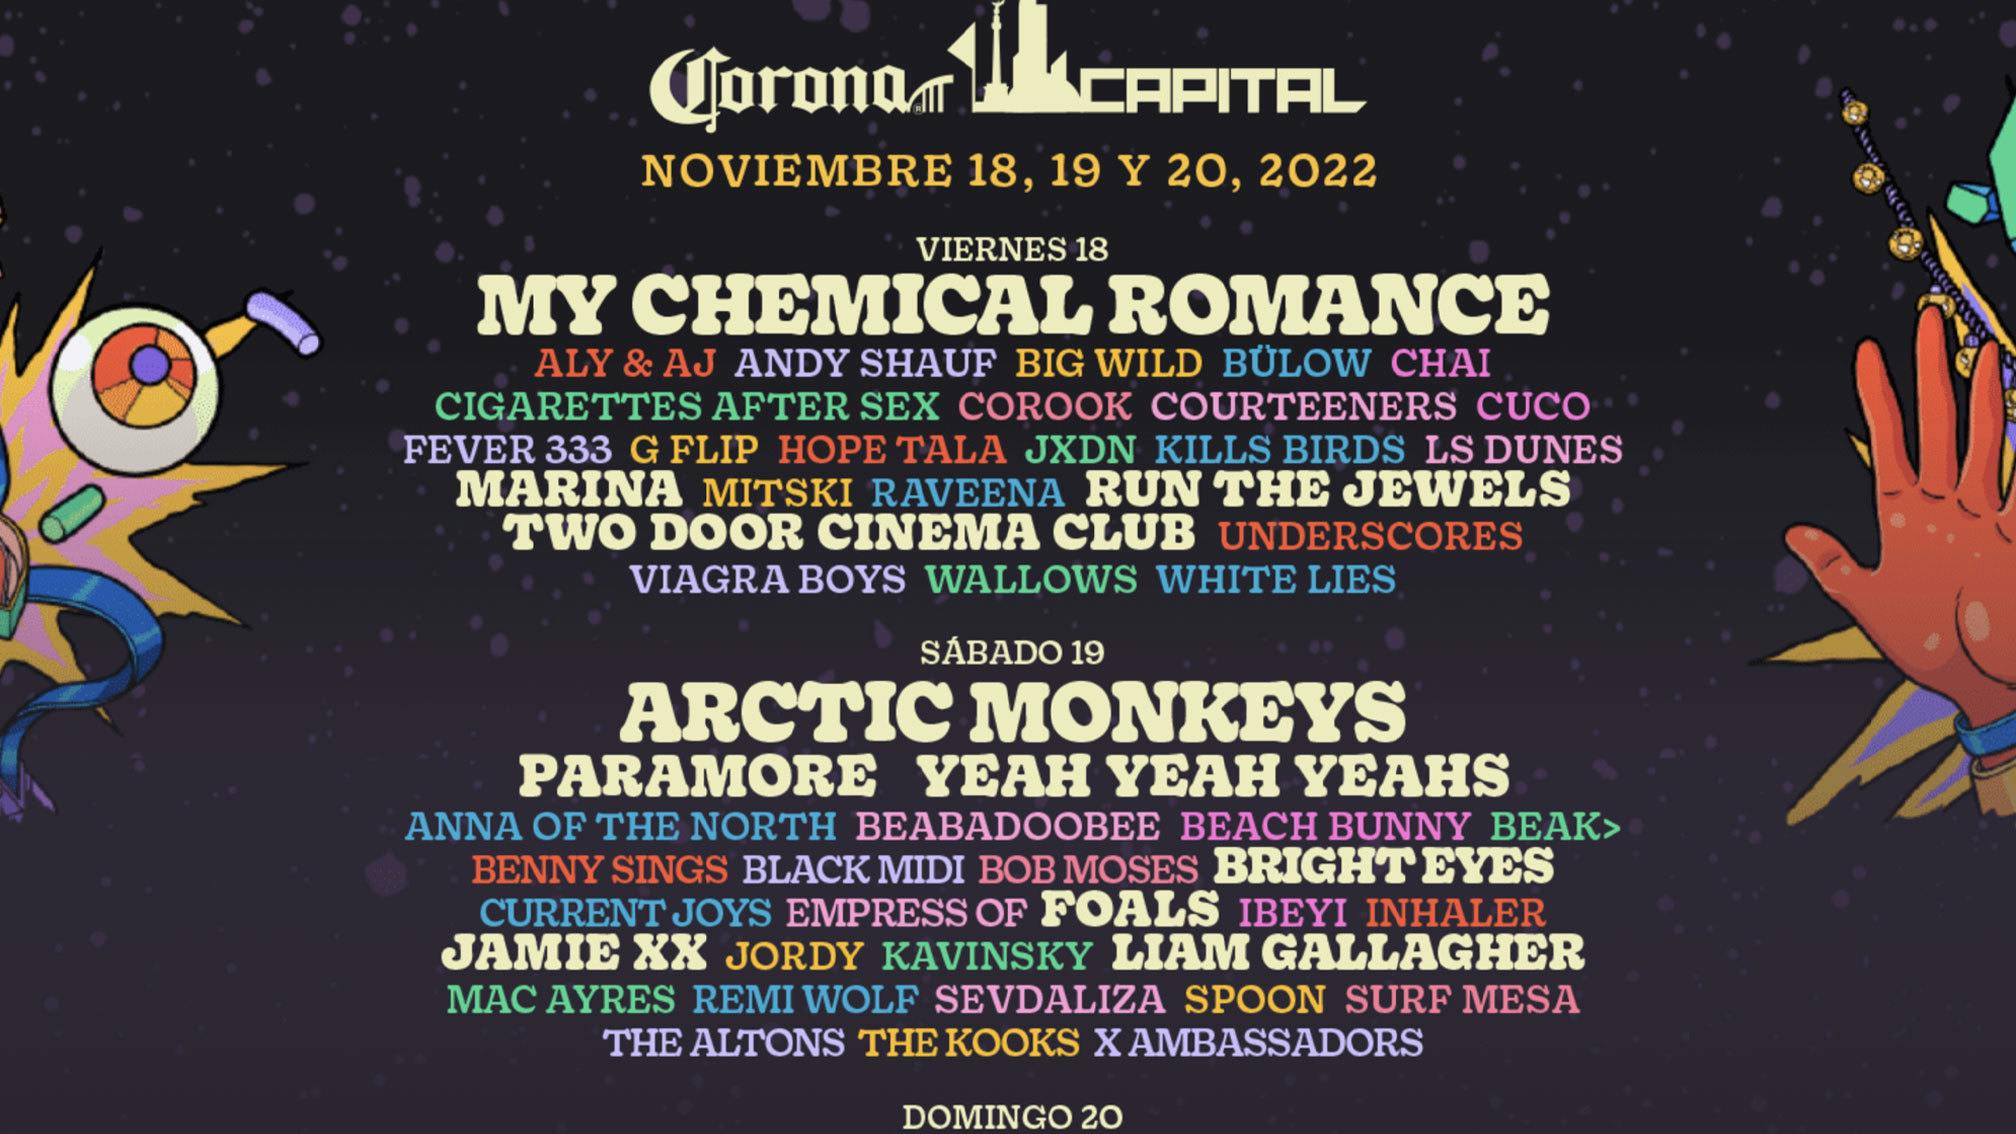 My Chemical Romance, Paramore and more for Mexico’s Corona Capital festival